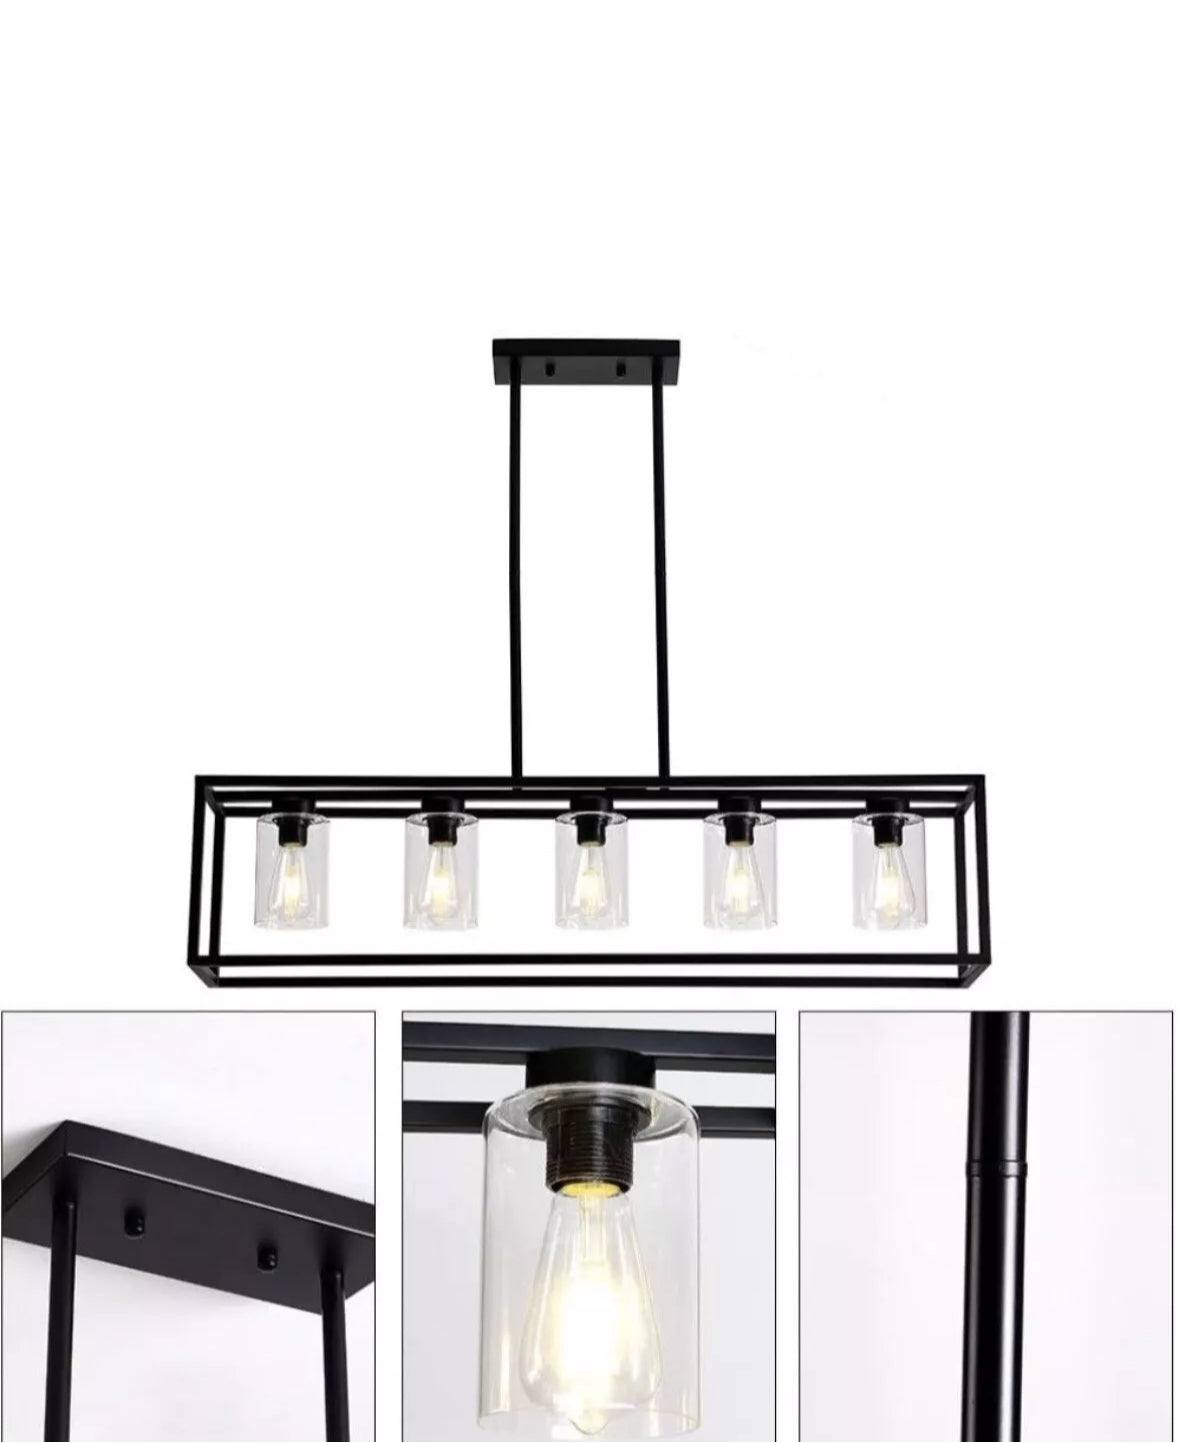 XILICON Dining Room Lighting Fixture Hanging Farmhouse Black 5 Light Modern Pendant Lighting Contemporary Chandeliers with Glass Shade for Living Dini - Selzalot